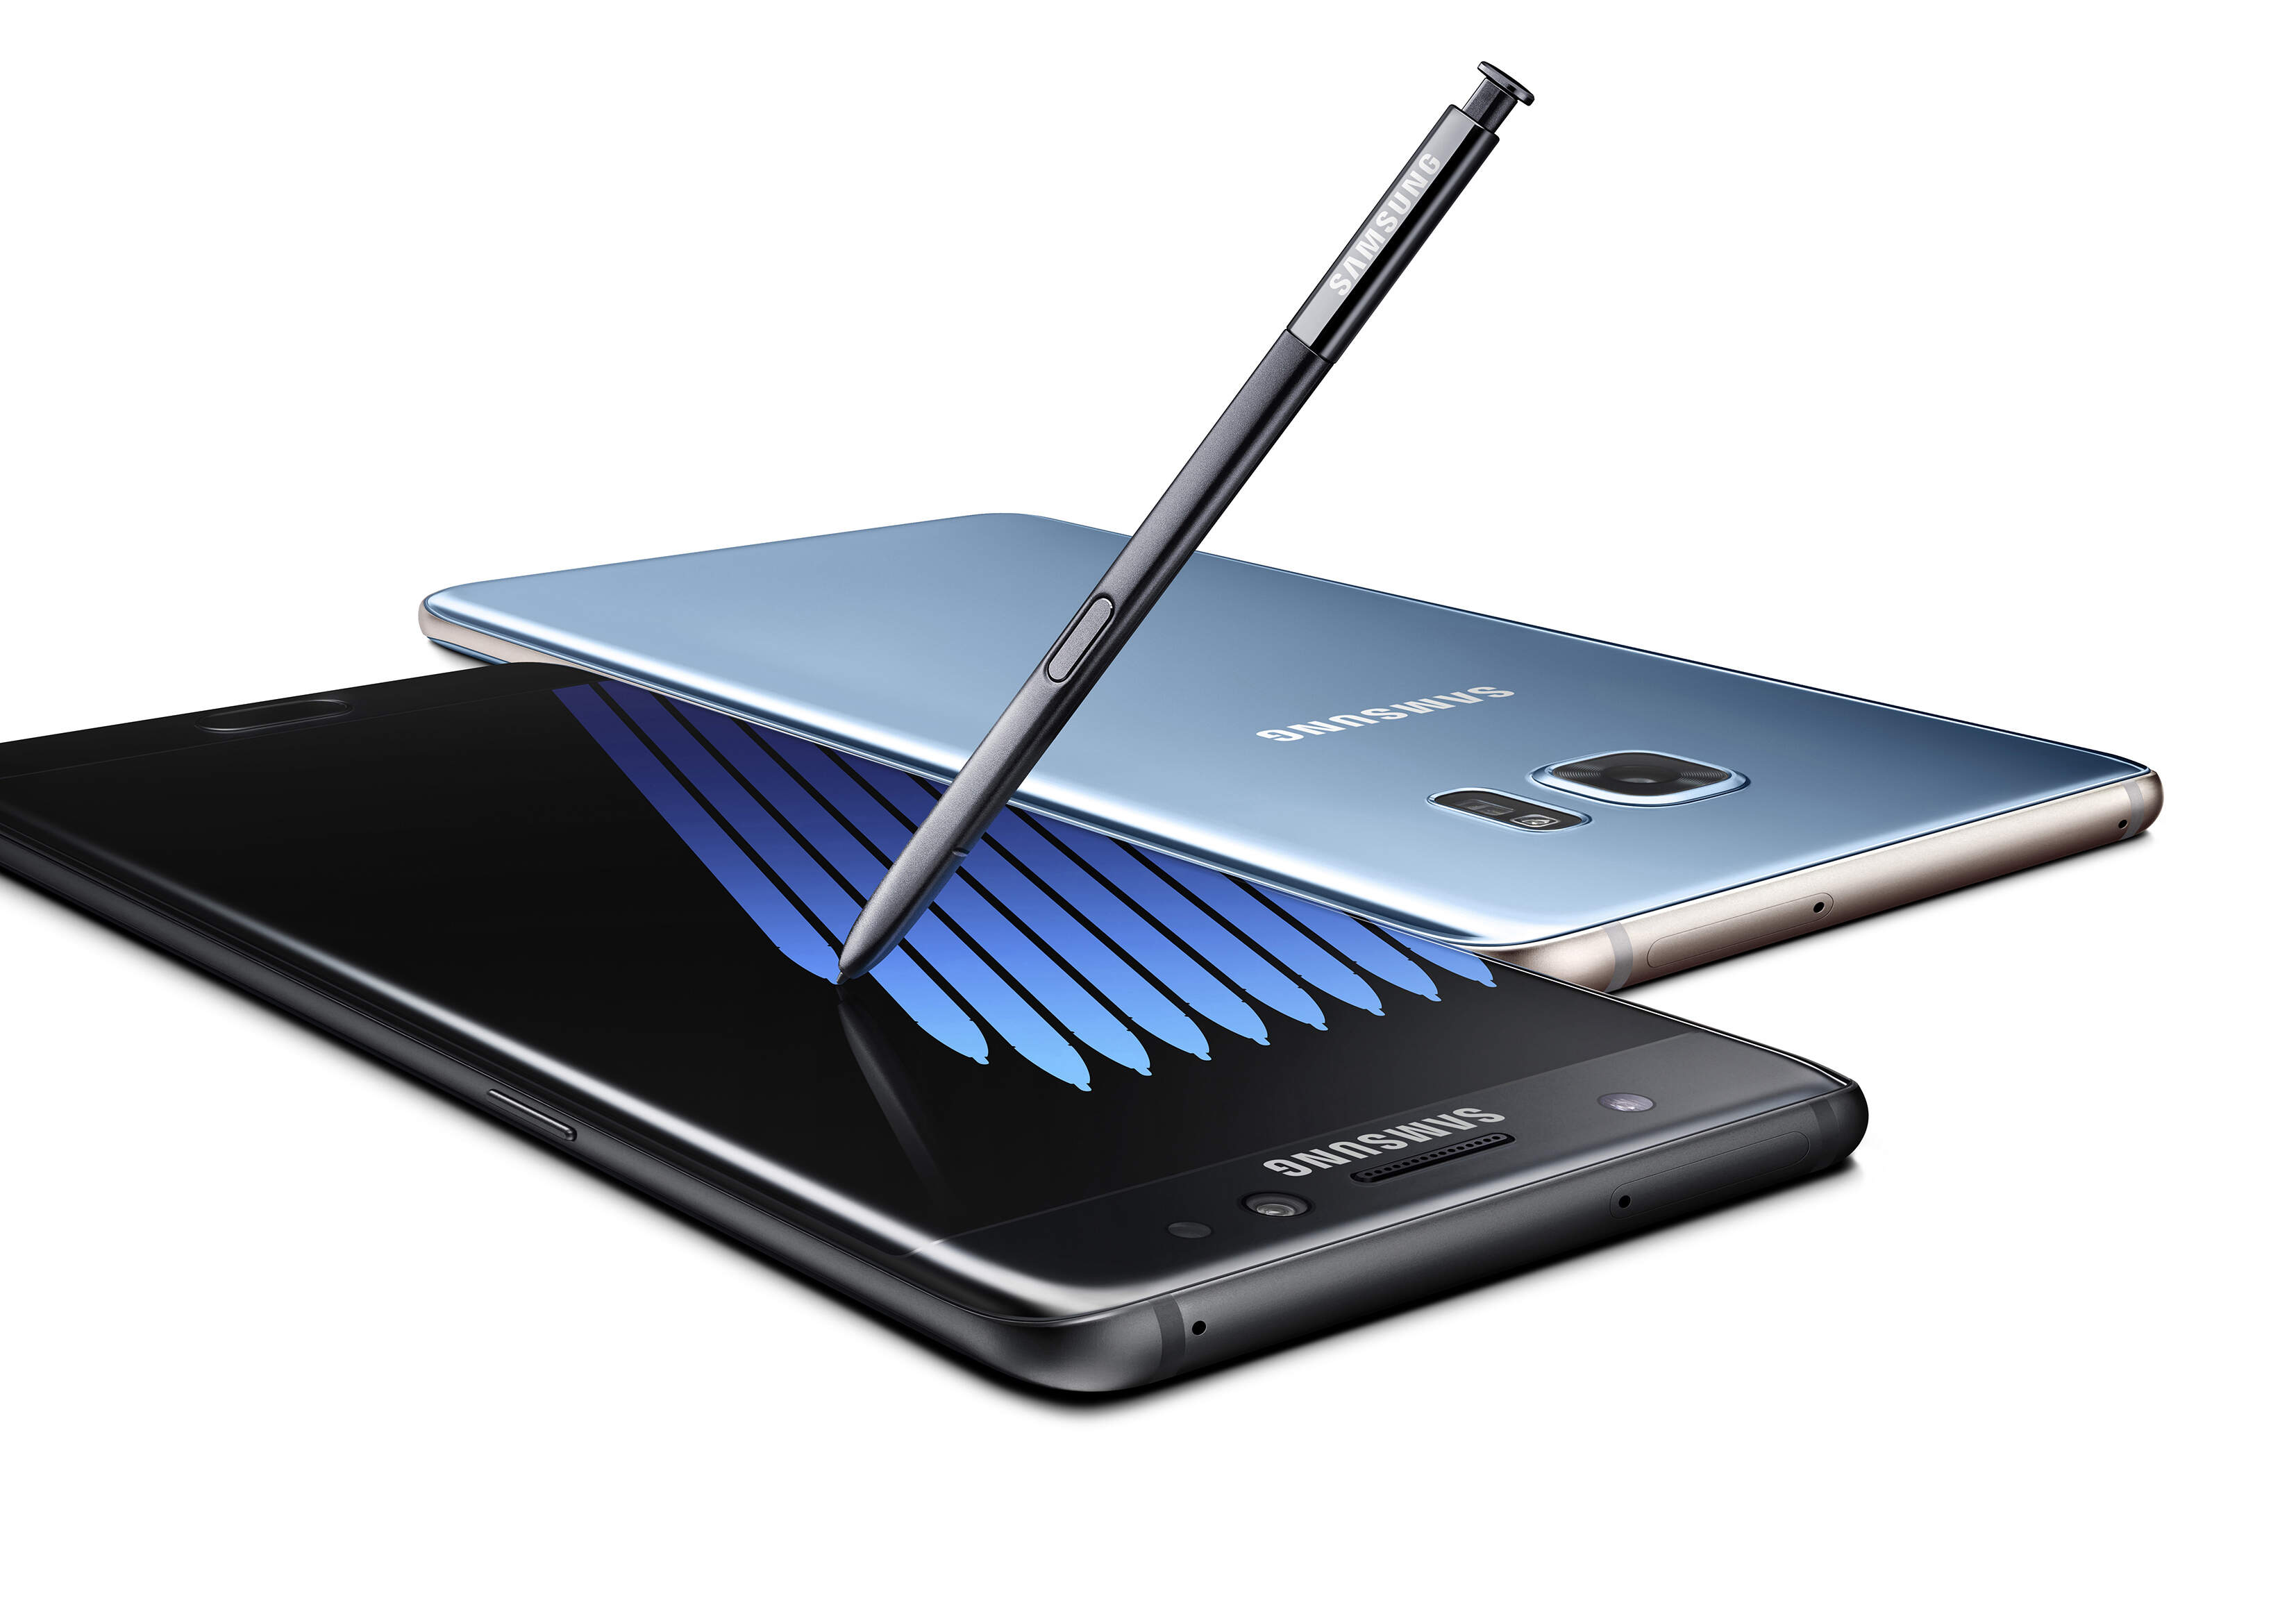 pre-order-demand-high-for-galaxy-note-7